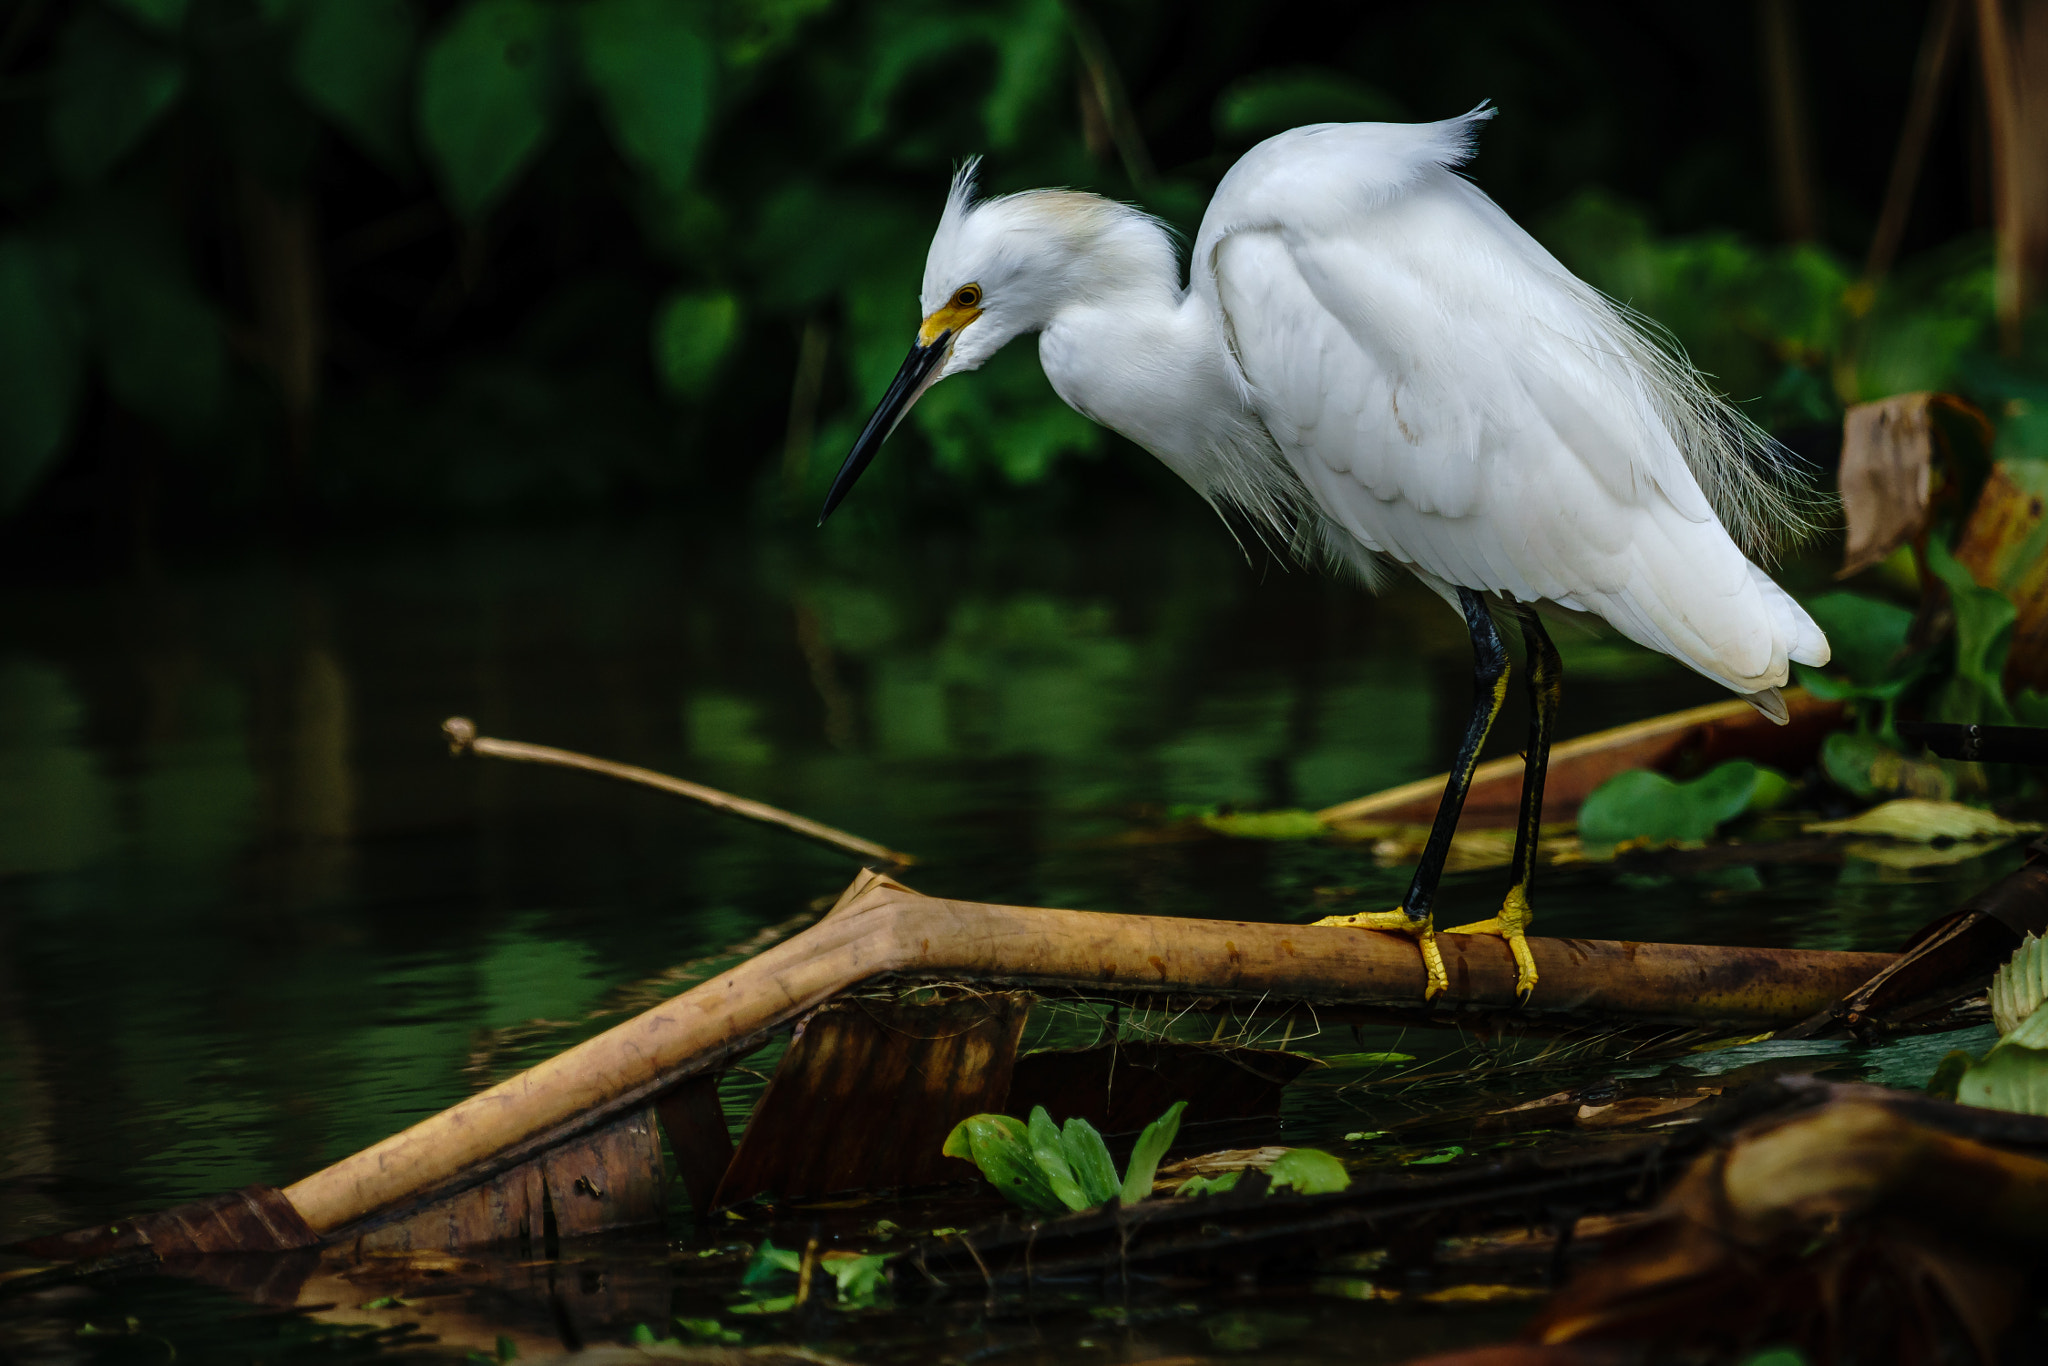 Sony a6000 sample photo. Tortuguero canals, costa rica photography